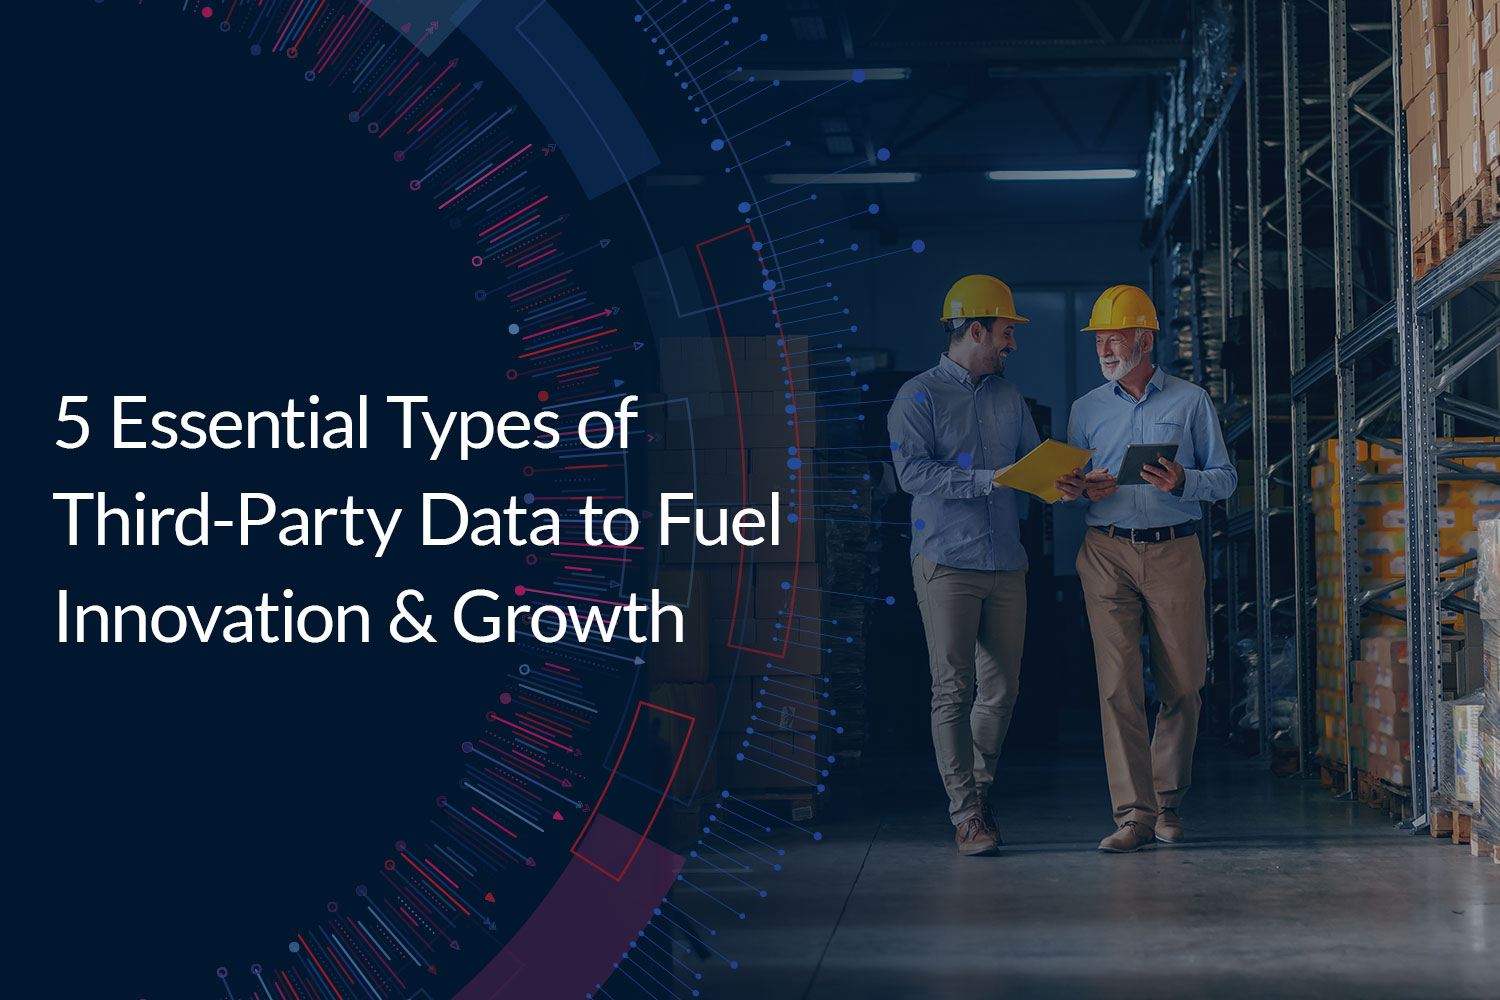 5 Essential Types of Third-Party Data Manufacturers Can Use Today to Fuel Innovation & Growth Tomorrow